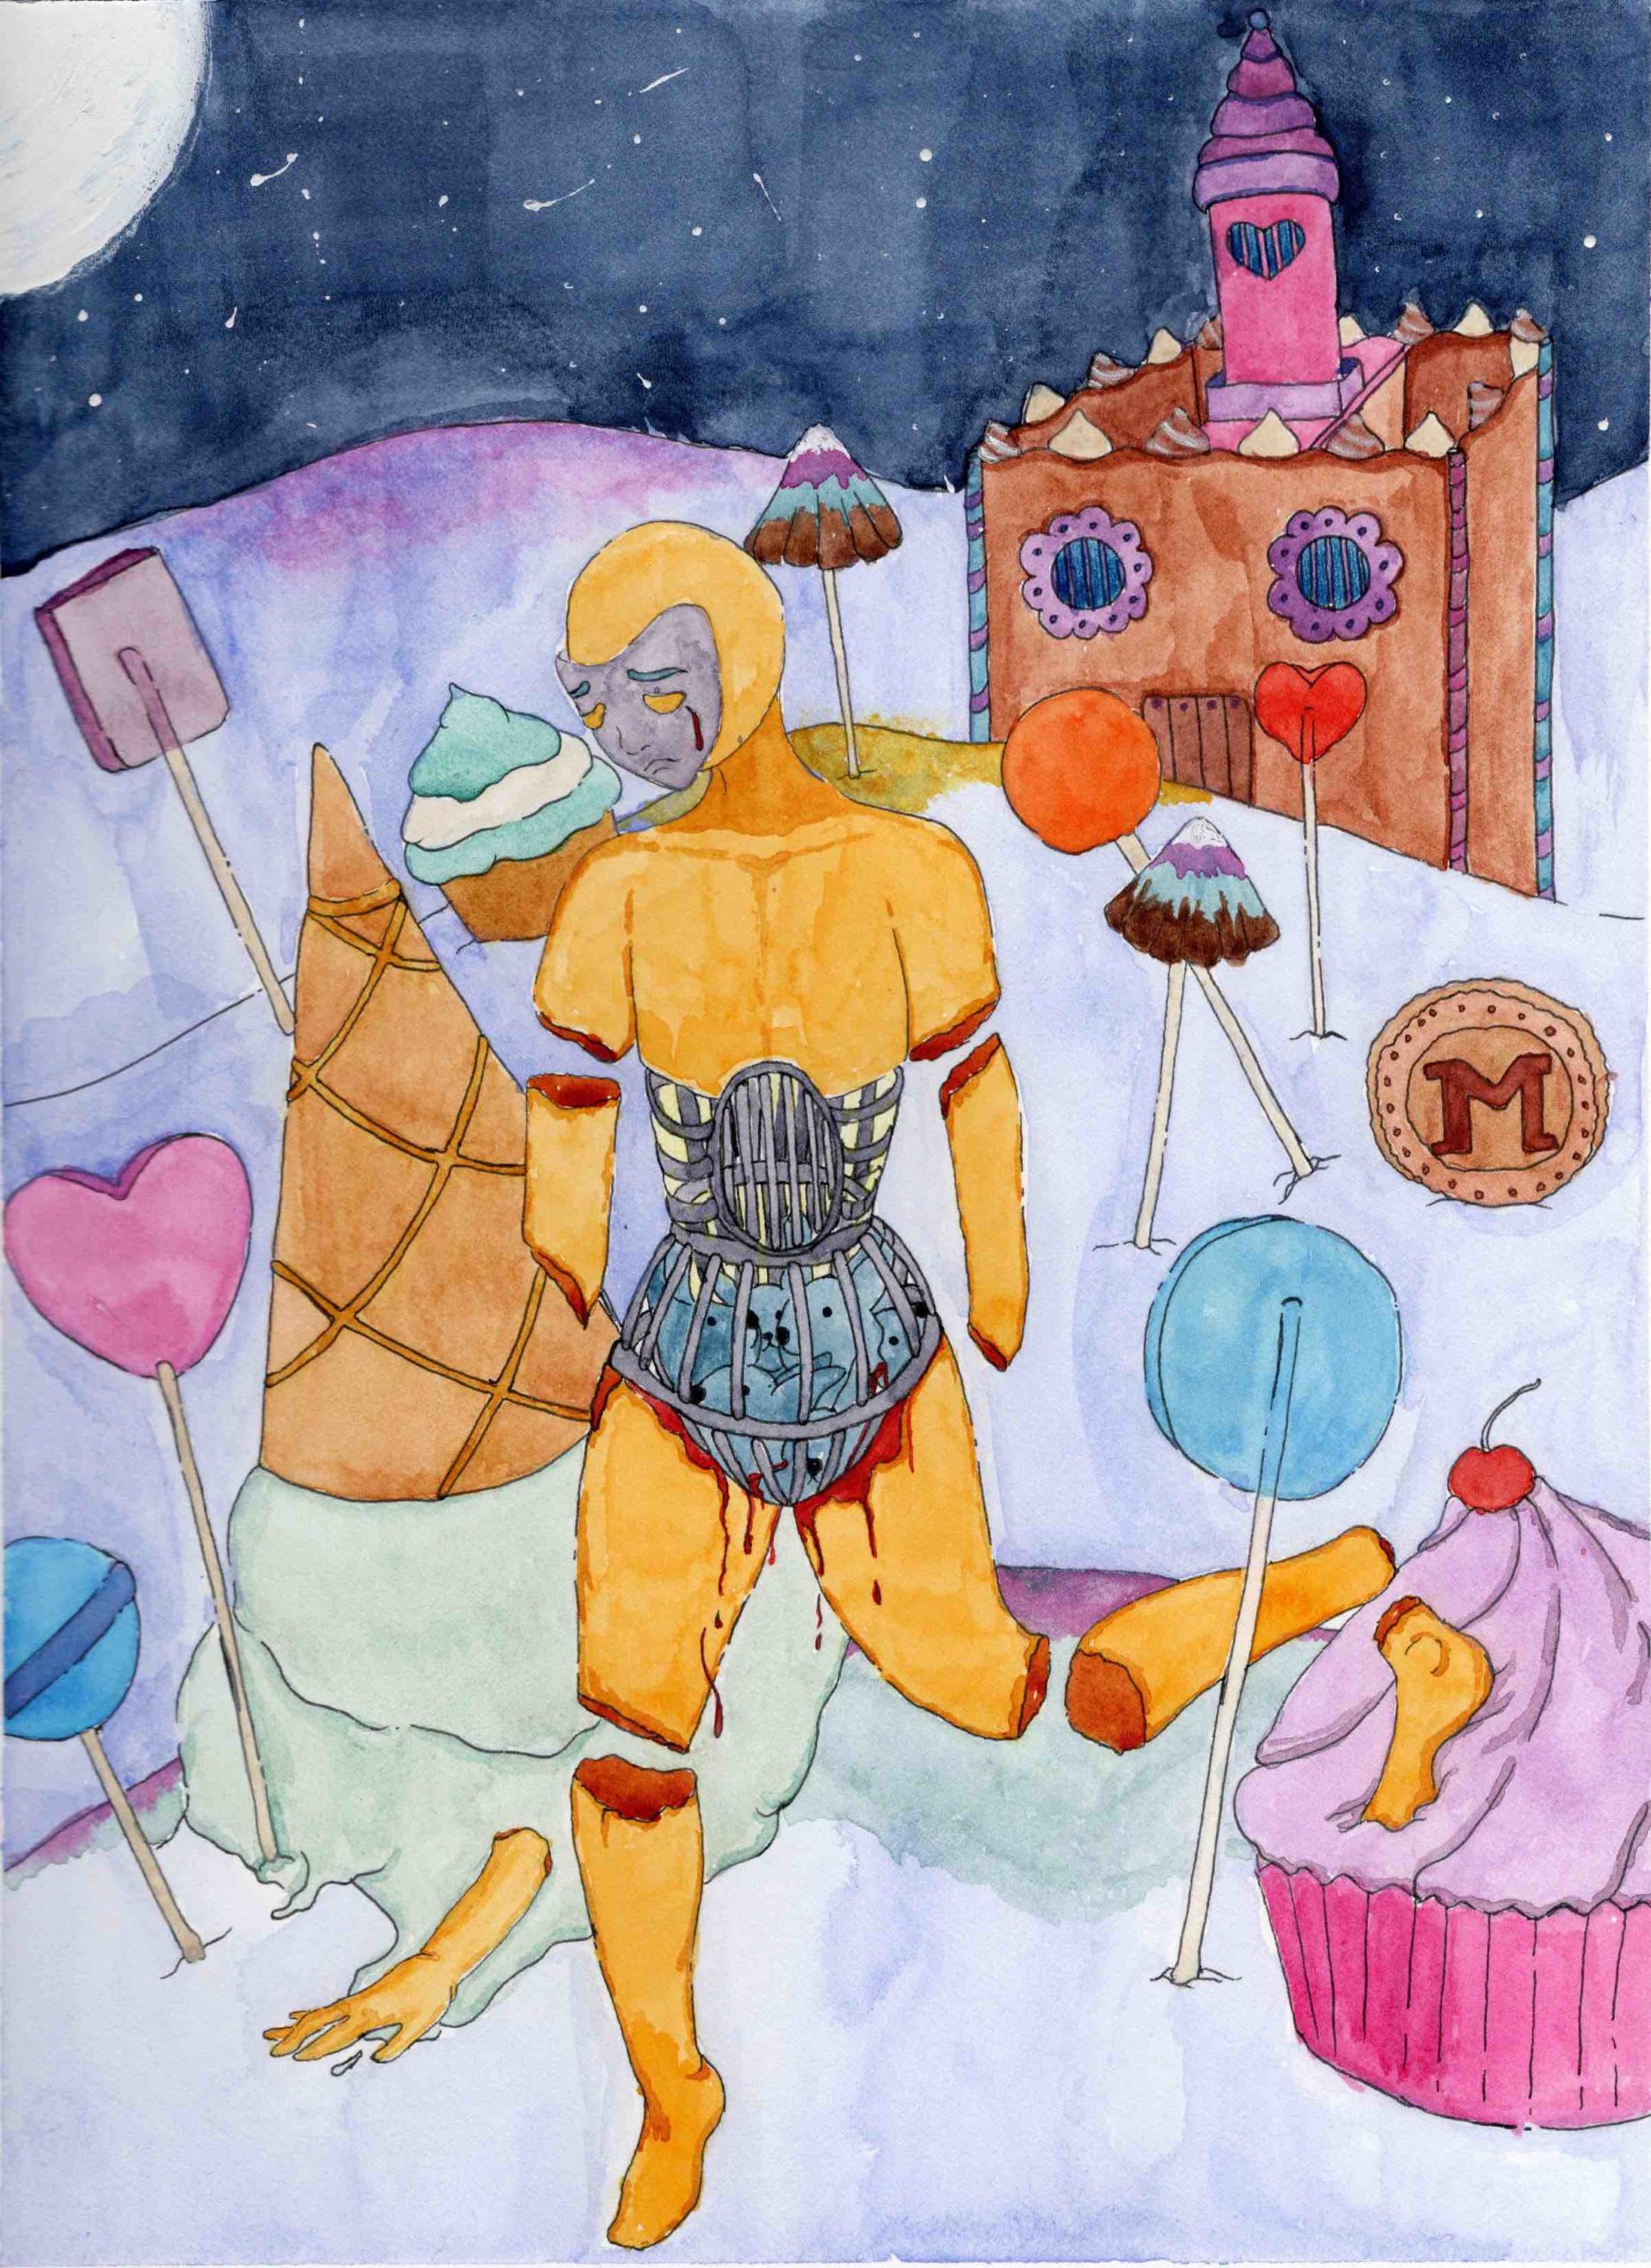 This is a pen drawing colourized with watercolour, coloured pencil, and guache. In a pale blue and violet landscape, larger than life lollypops grow, and pastel-frosted cupcakes and ice-cream cones stud the ground. A colourful gingerbread house peaks out from behind a frosted hill. The scene is bathed in the light of a full moon. In the foreground, a crying yellow figure looks downward dejectedly. Its arms and legs are sectioned like meat, bloody at the site of each cut. One of the feet is stuck in the pink frosting of a large cupcake, and one arm emerges from a minty mound of melting ice-cream. The figure’s centre is fleshless, revealing a metal cage filled with blue bunnies instead of vital organs. Blood drips down the thighs from the cage.